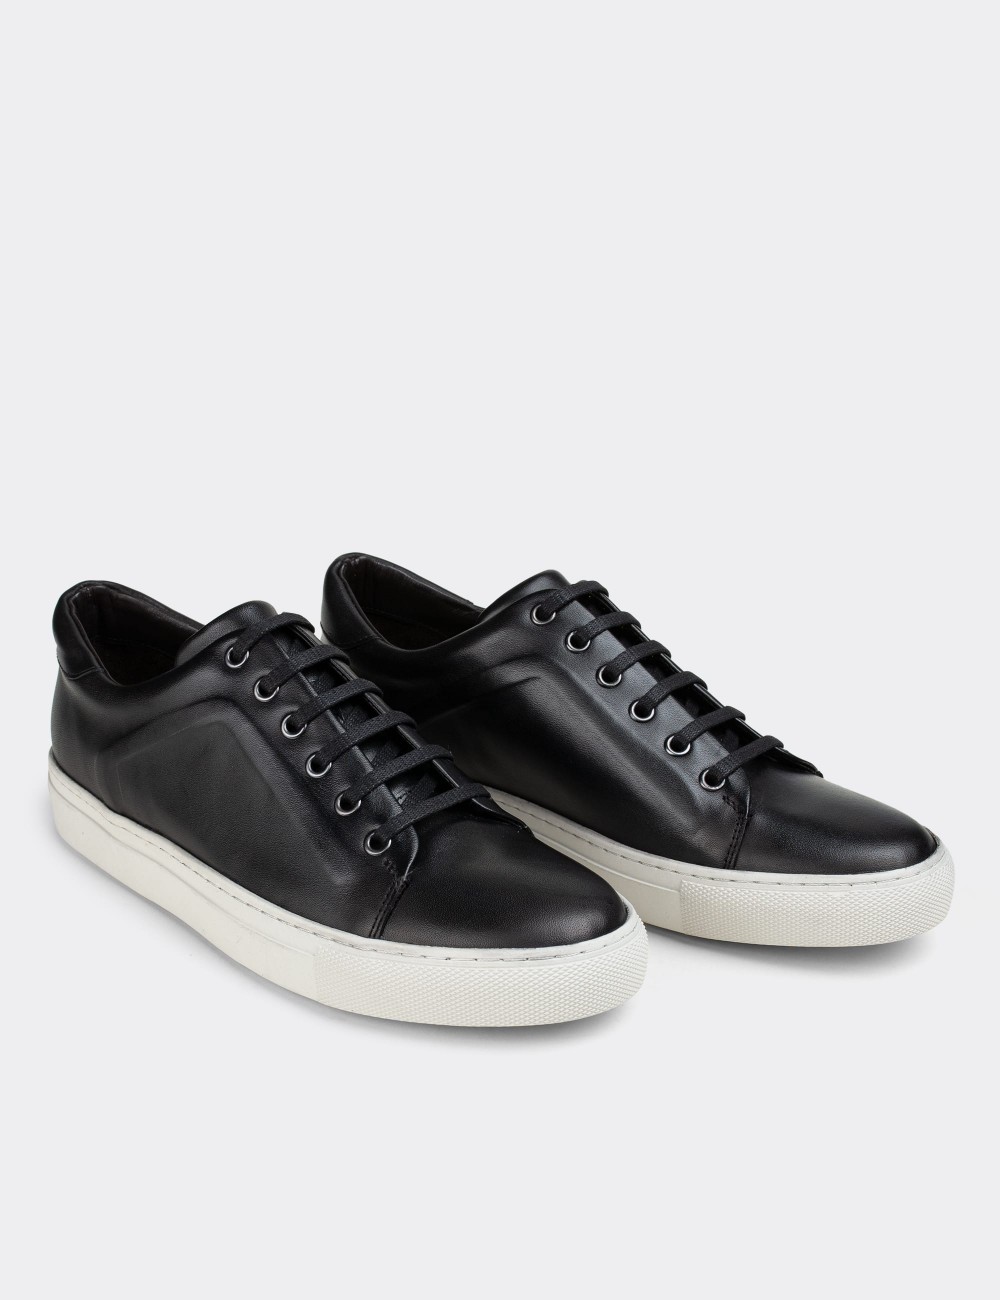 Black  Leather Sneakers - 01833MSYHC01